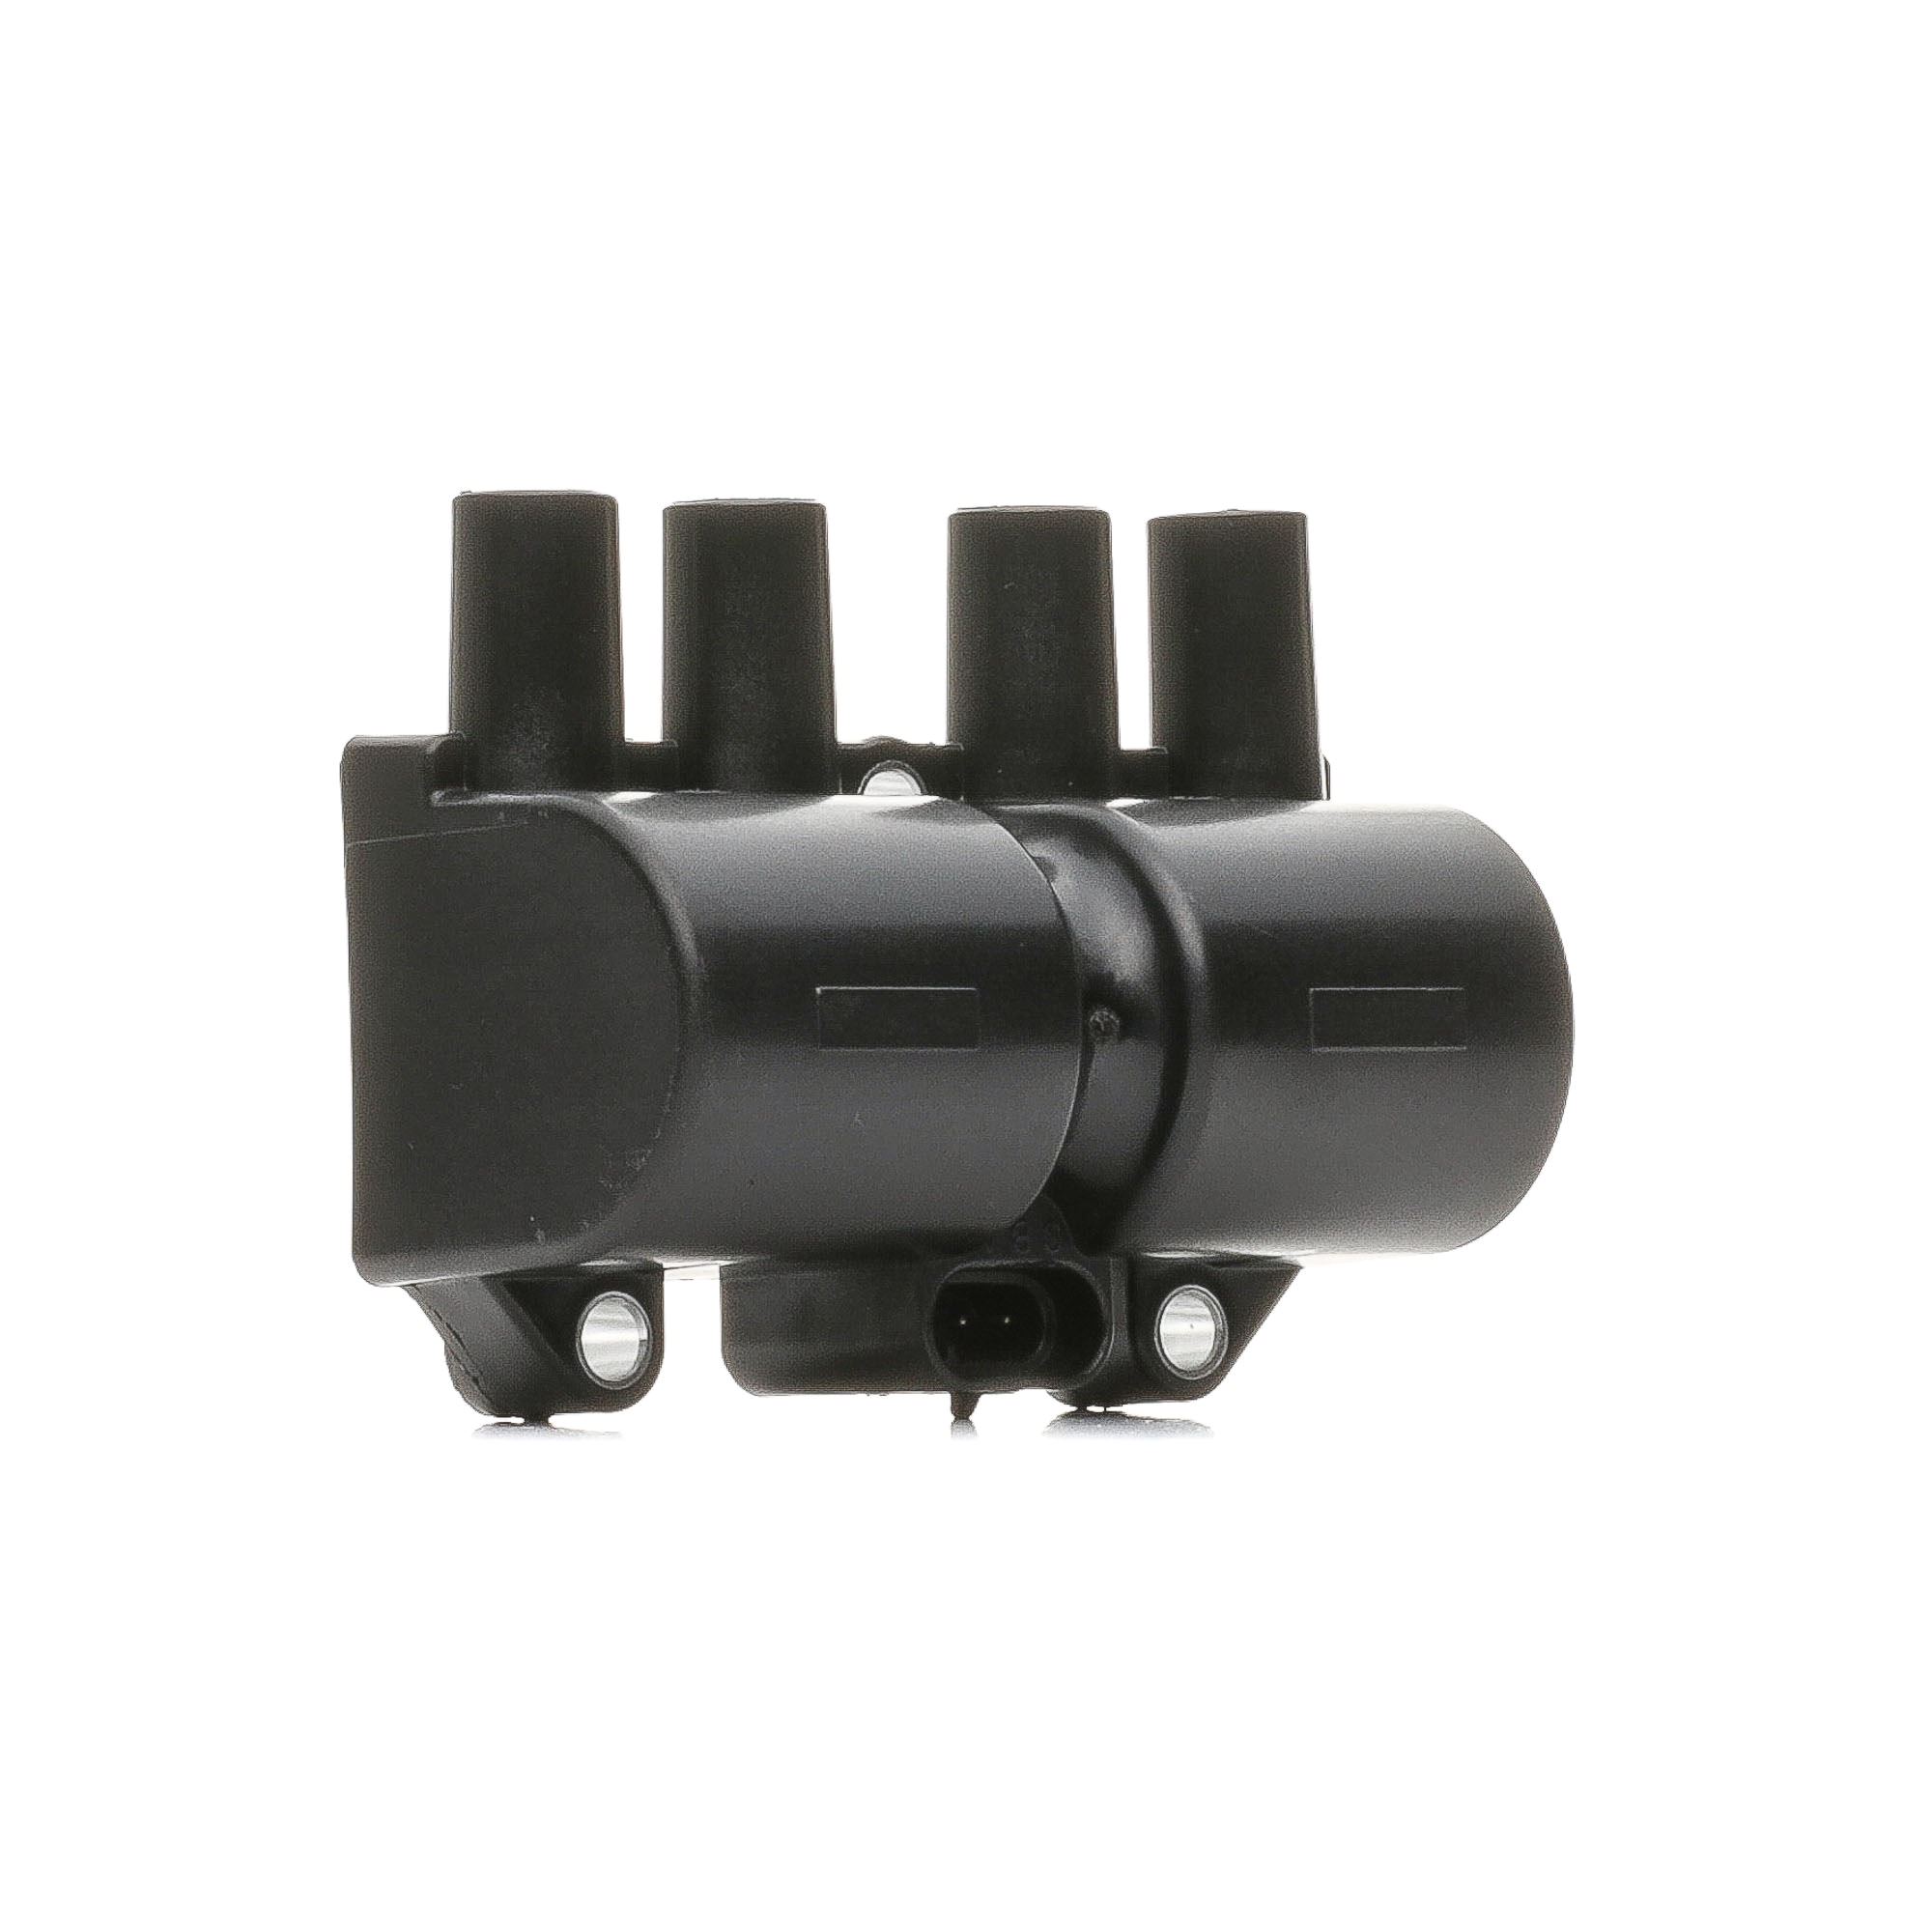 RIDEX 689C0046 Ignition coil 3-pin connector, 12V, with integrated switch, Number of connectors: 4